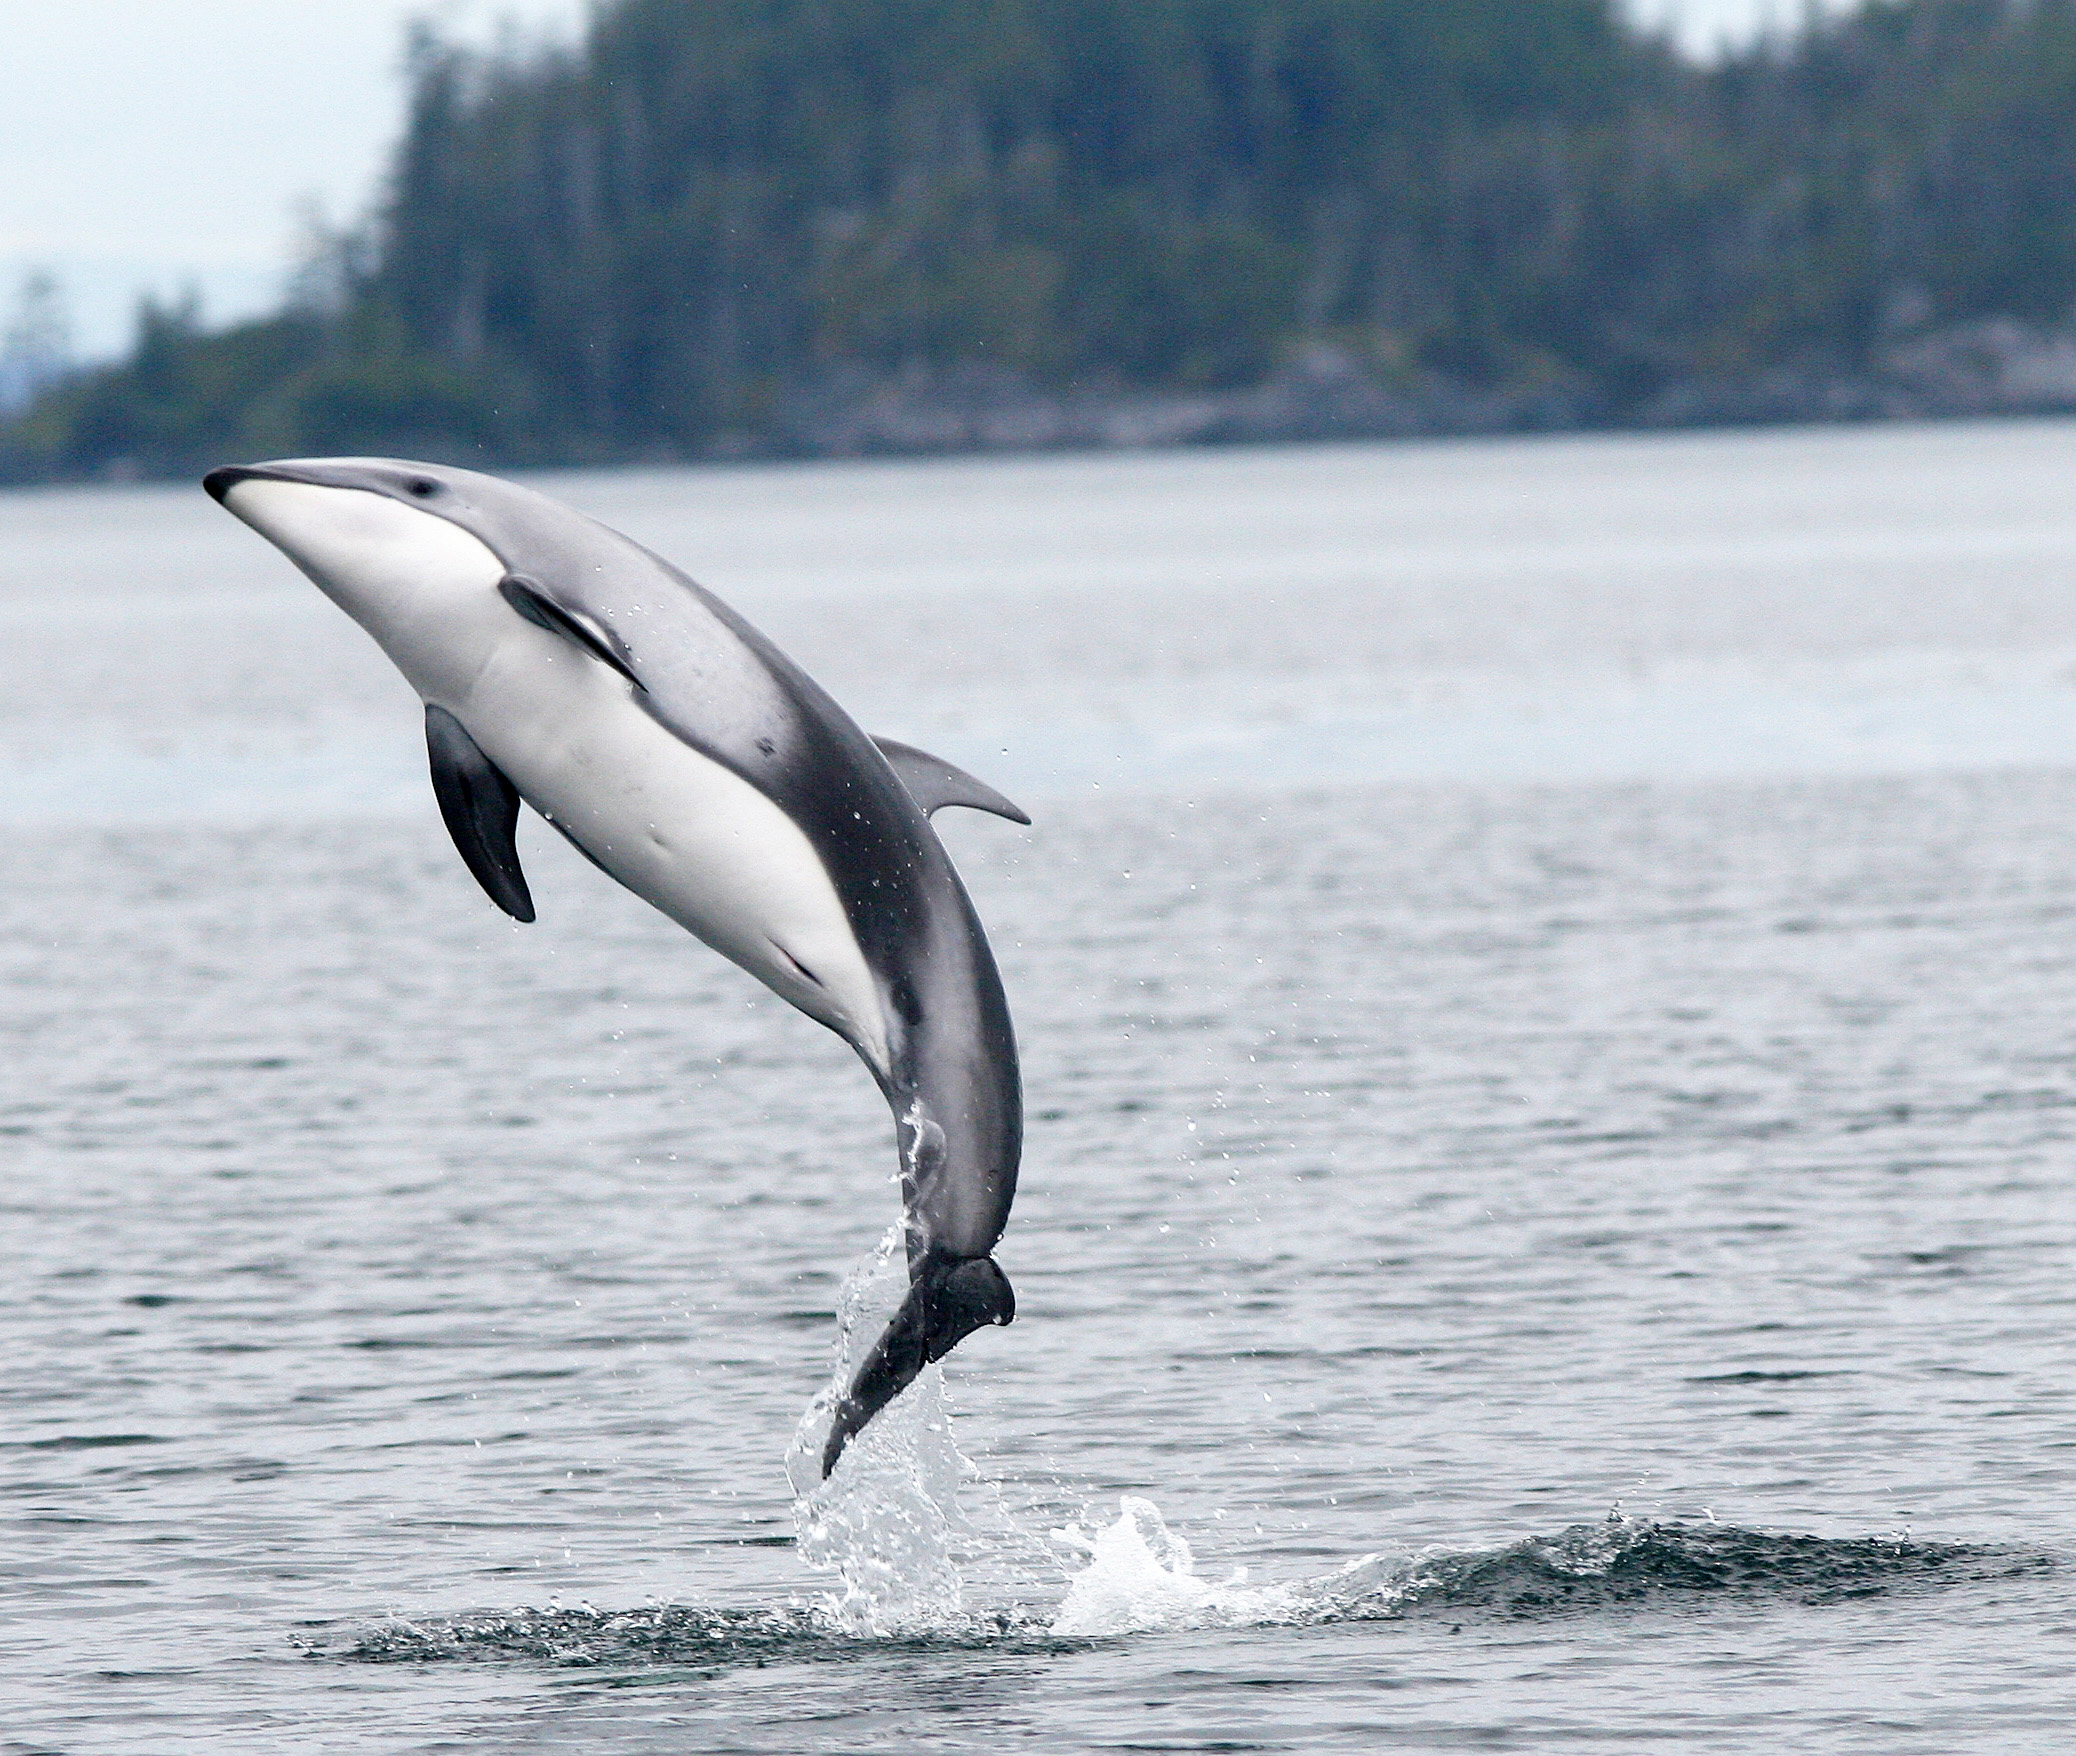 Jumping dolphin